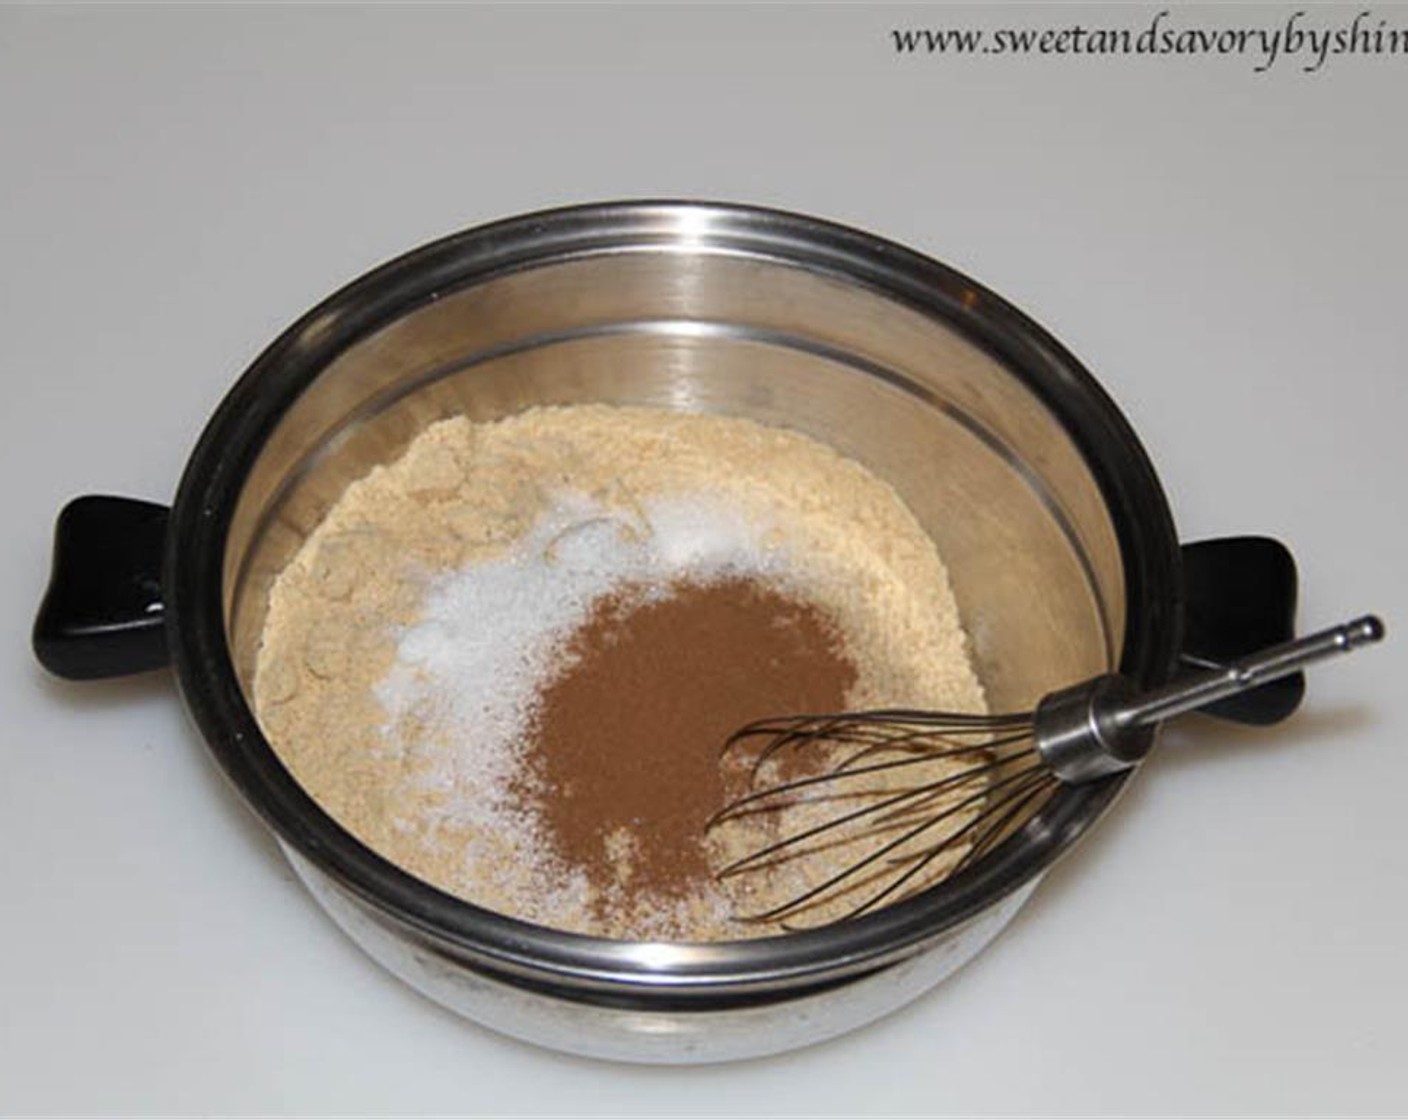 step 2 Mix together Graham Cracker Crumbs (2 1/2 cups), Ground Cinnamon (1/2 tsp) and Granulated Sugar (2 Tbsp). Add butter and mix well.